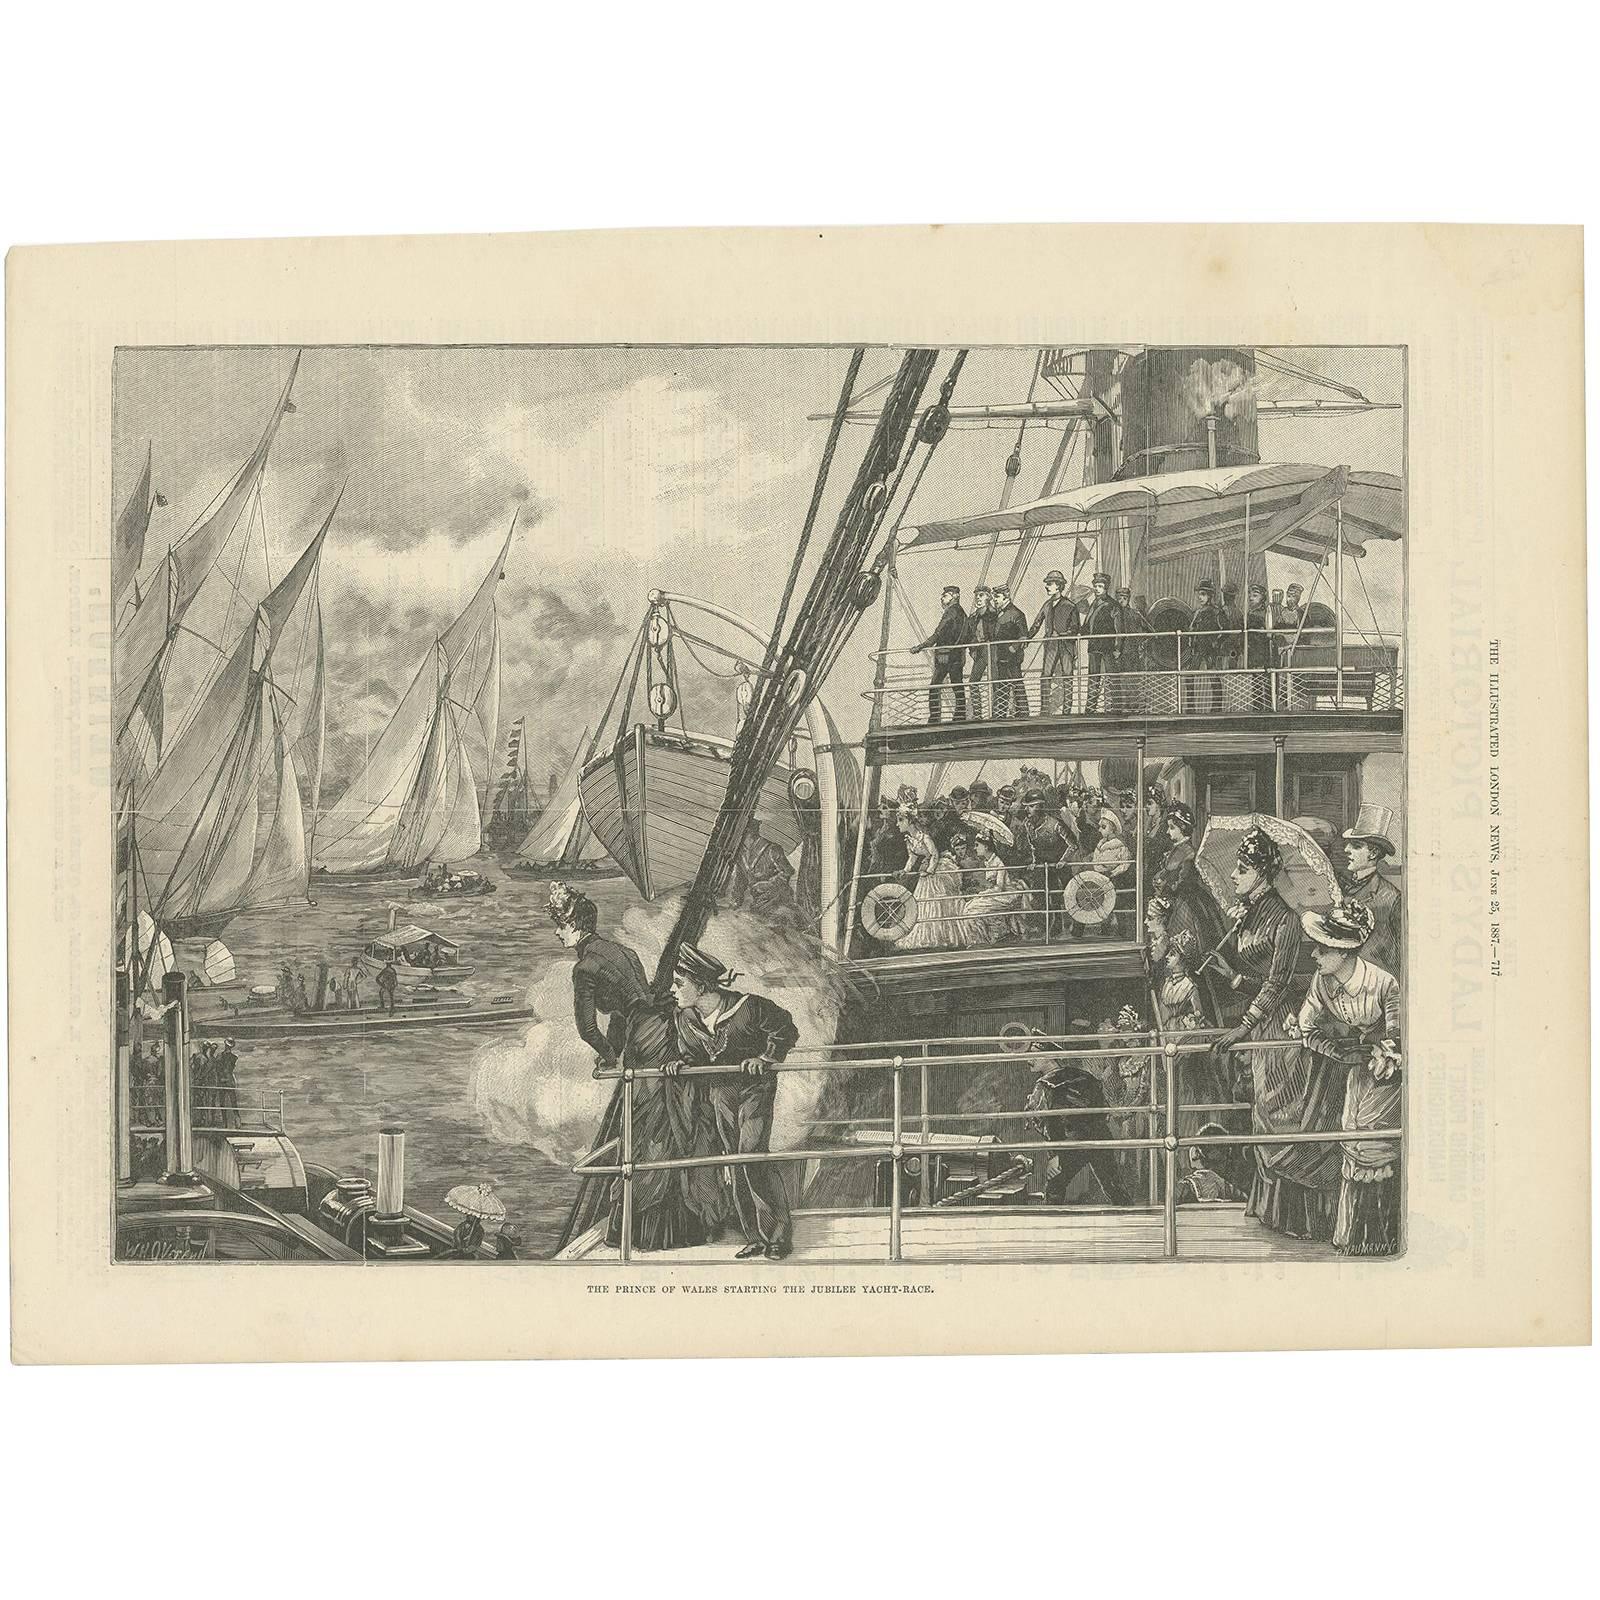 Antique Print of the Prince of Wales Starting the Jubilee Yacht-Race, 1887 For Sale